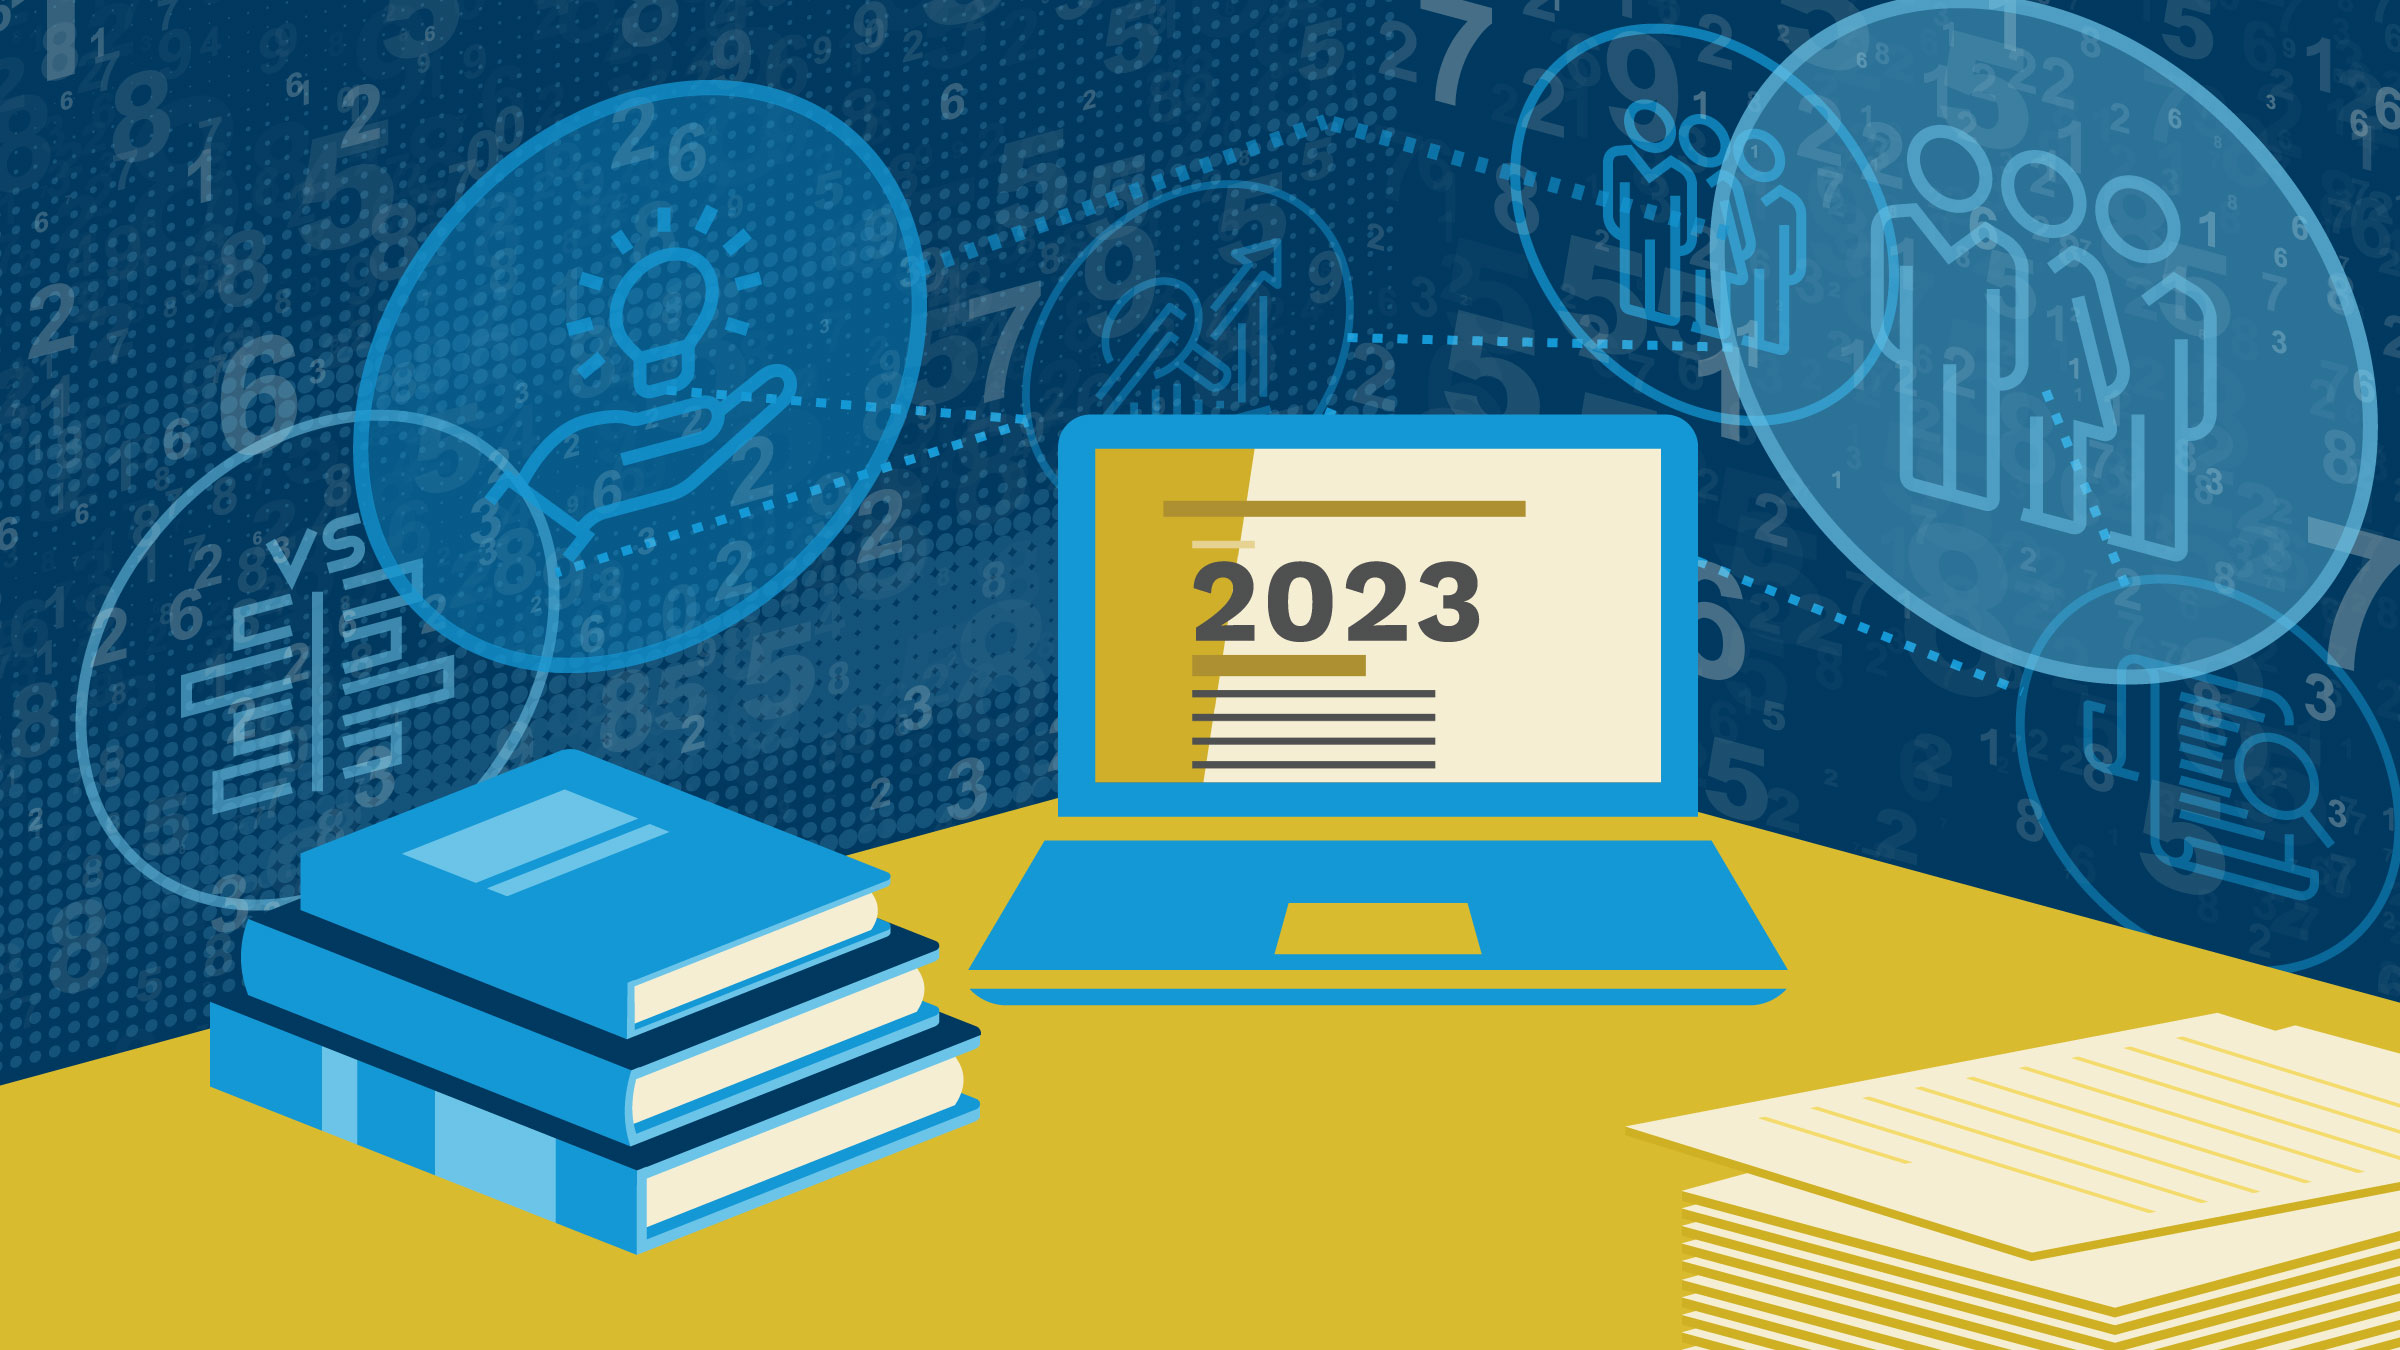 Blue and gold illustration featuring books, a laptop, and research symbols